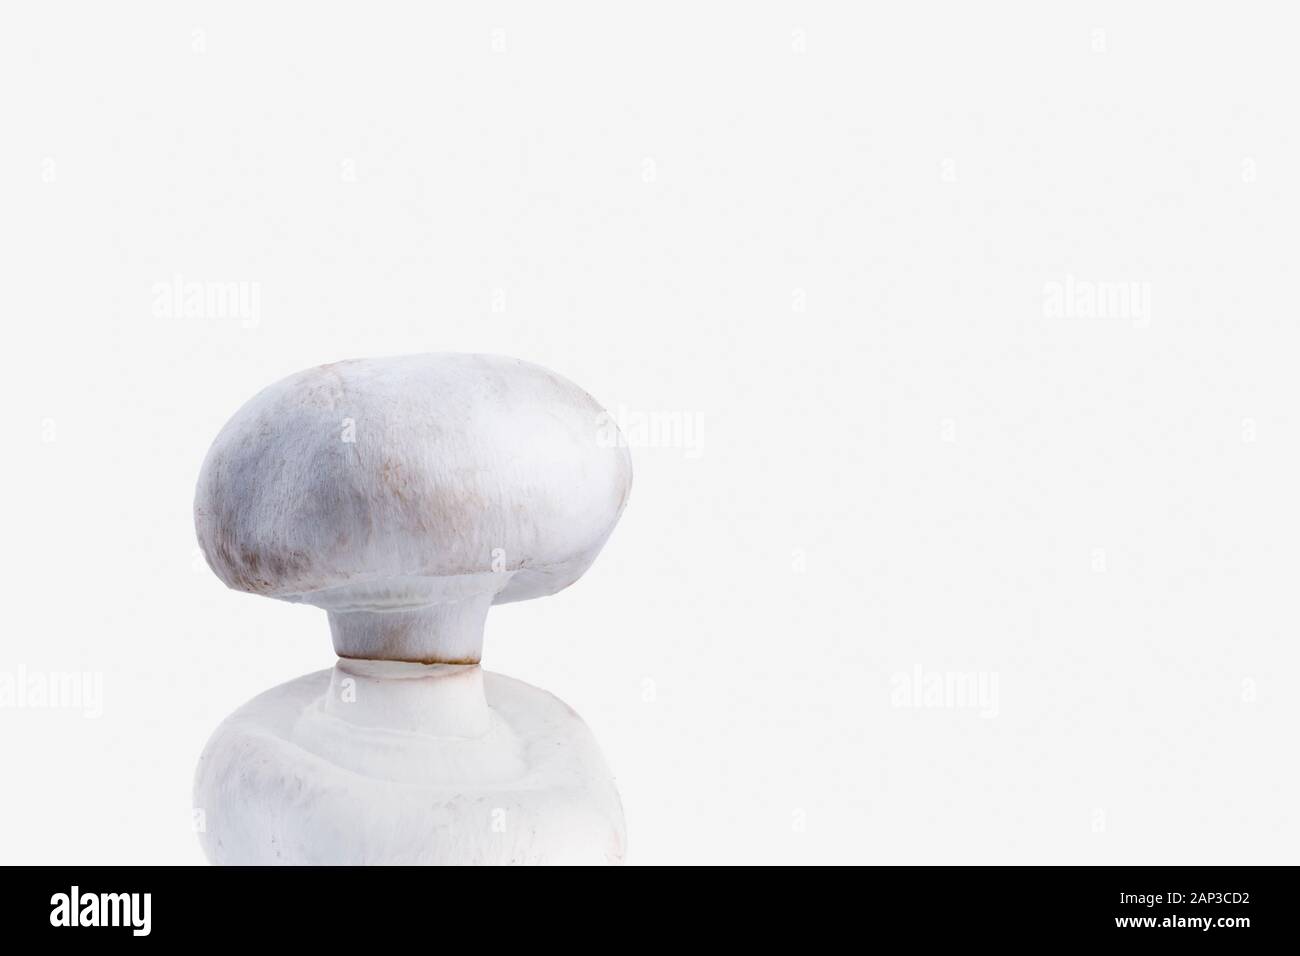 Standing champignon mushroom isolated on white background with space for text. Stock Photo